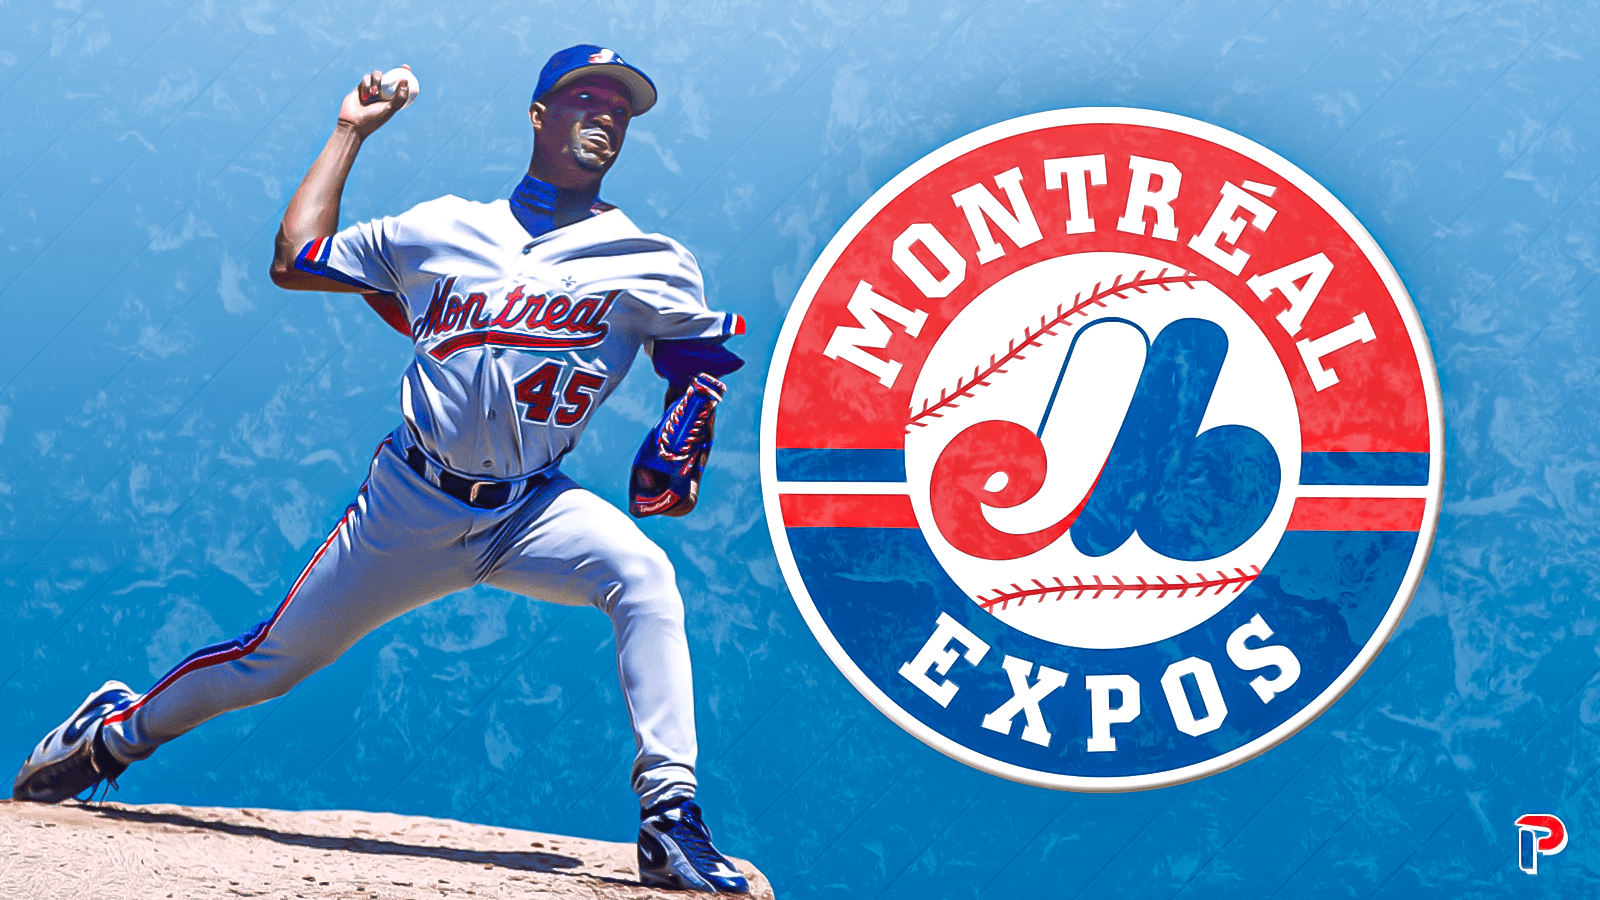 MLB expansion: Montreal has lots of nostalgia. But is that enough